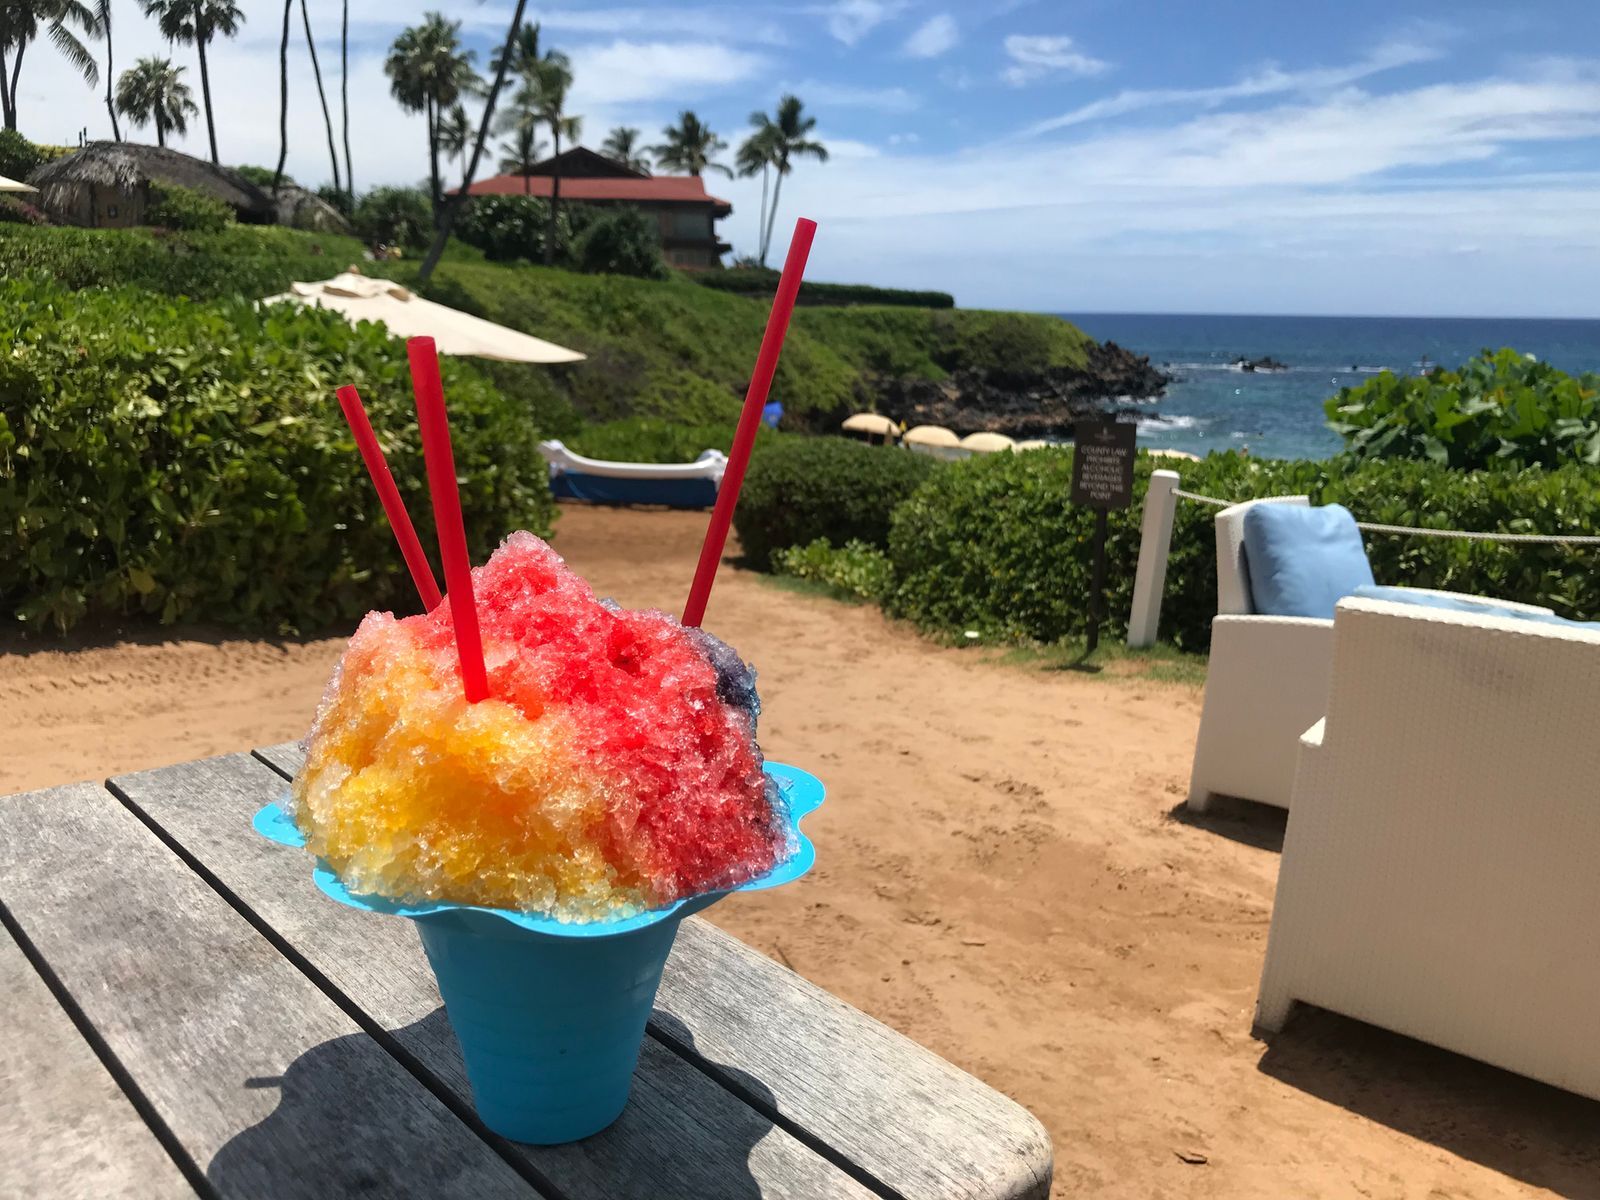 <p>A Hawaiian snow cone (called “shave ice” by locals) is a small mountain of <a href="https://www.hawaiianairlines.com/hawaii-stories/food-and-entertainment/shave-ice-history" rel="noreferrer noopener">shaved ice (not crushed, giving it an almost powdery consistency</a>) topped with colourful flavoured syrups. Absolutely refreshing!</p>